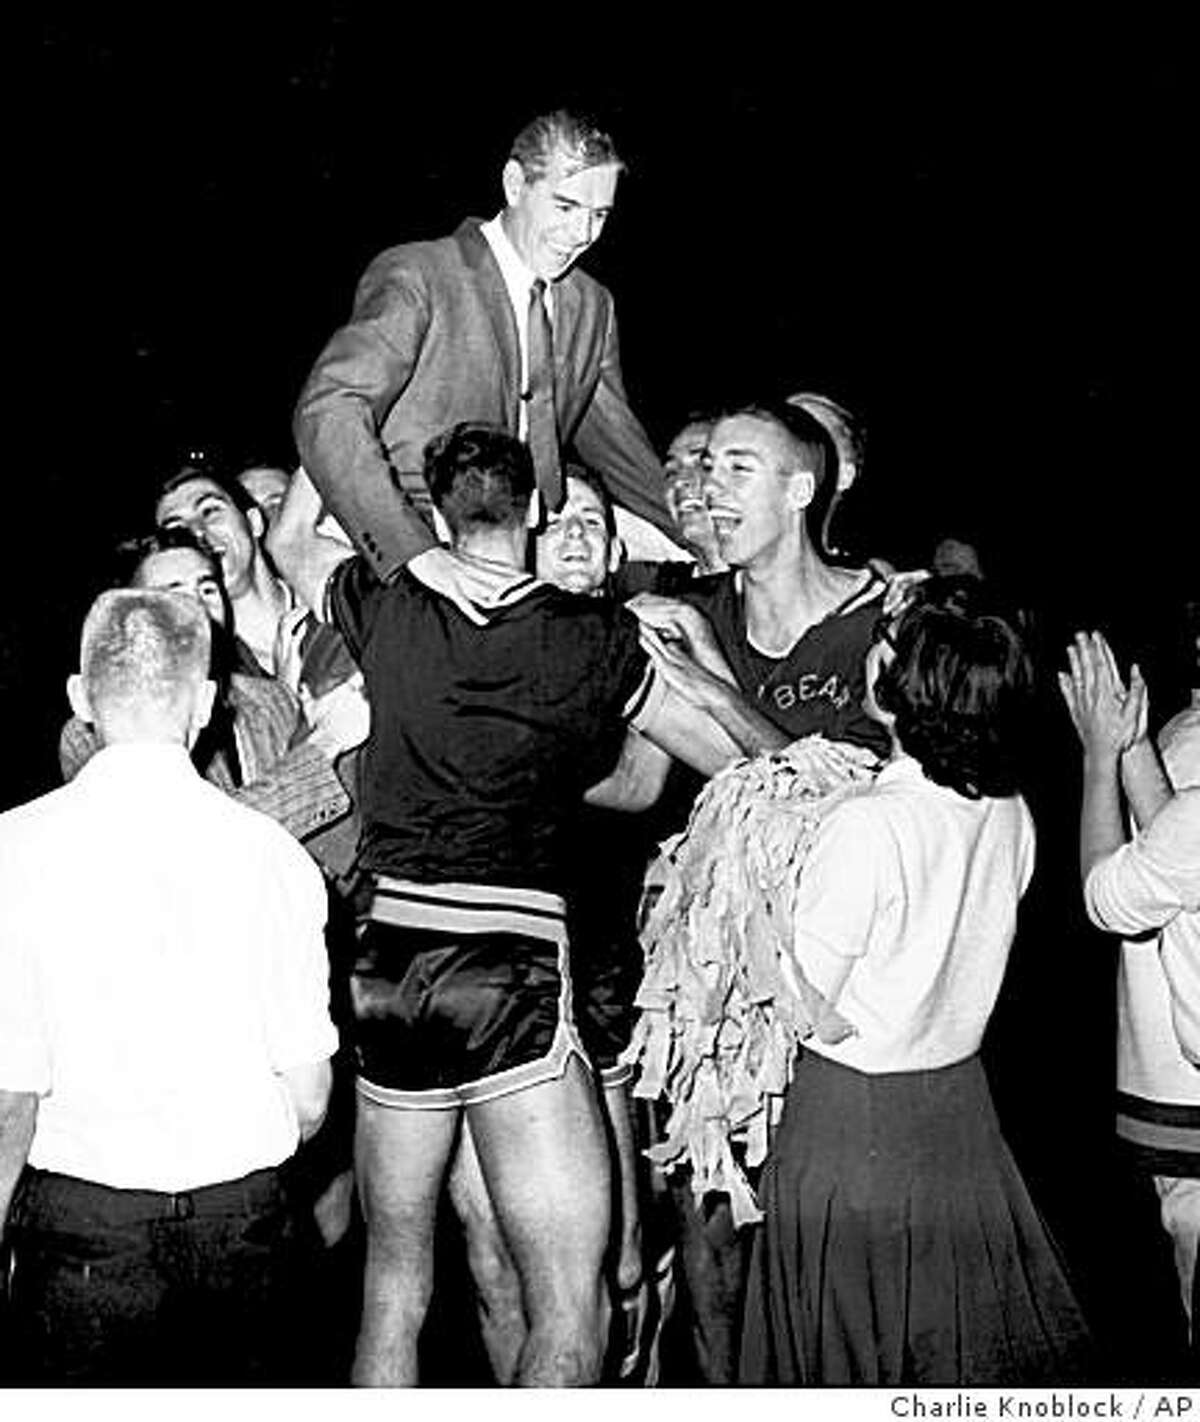 A smiling coach Pete Newell is hoisted to shoulders of members of the California Bears basketball team March 21, 1959 after they won a close, 71-70 decision over West Virginia at Louisville,Ky. to became NCAA champs.